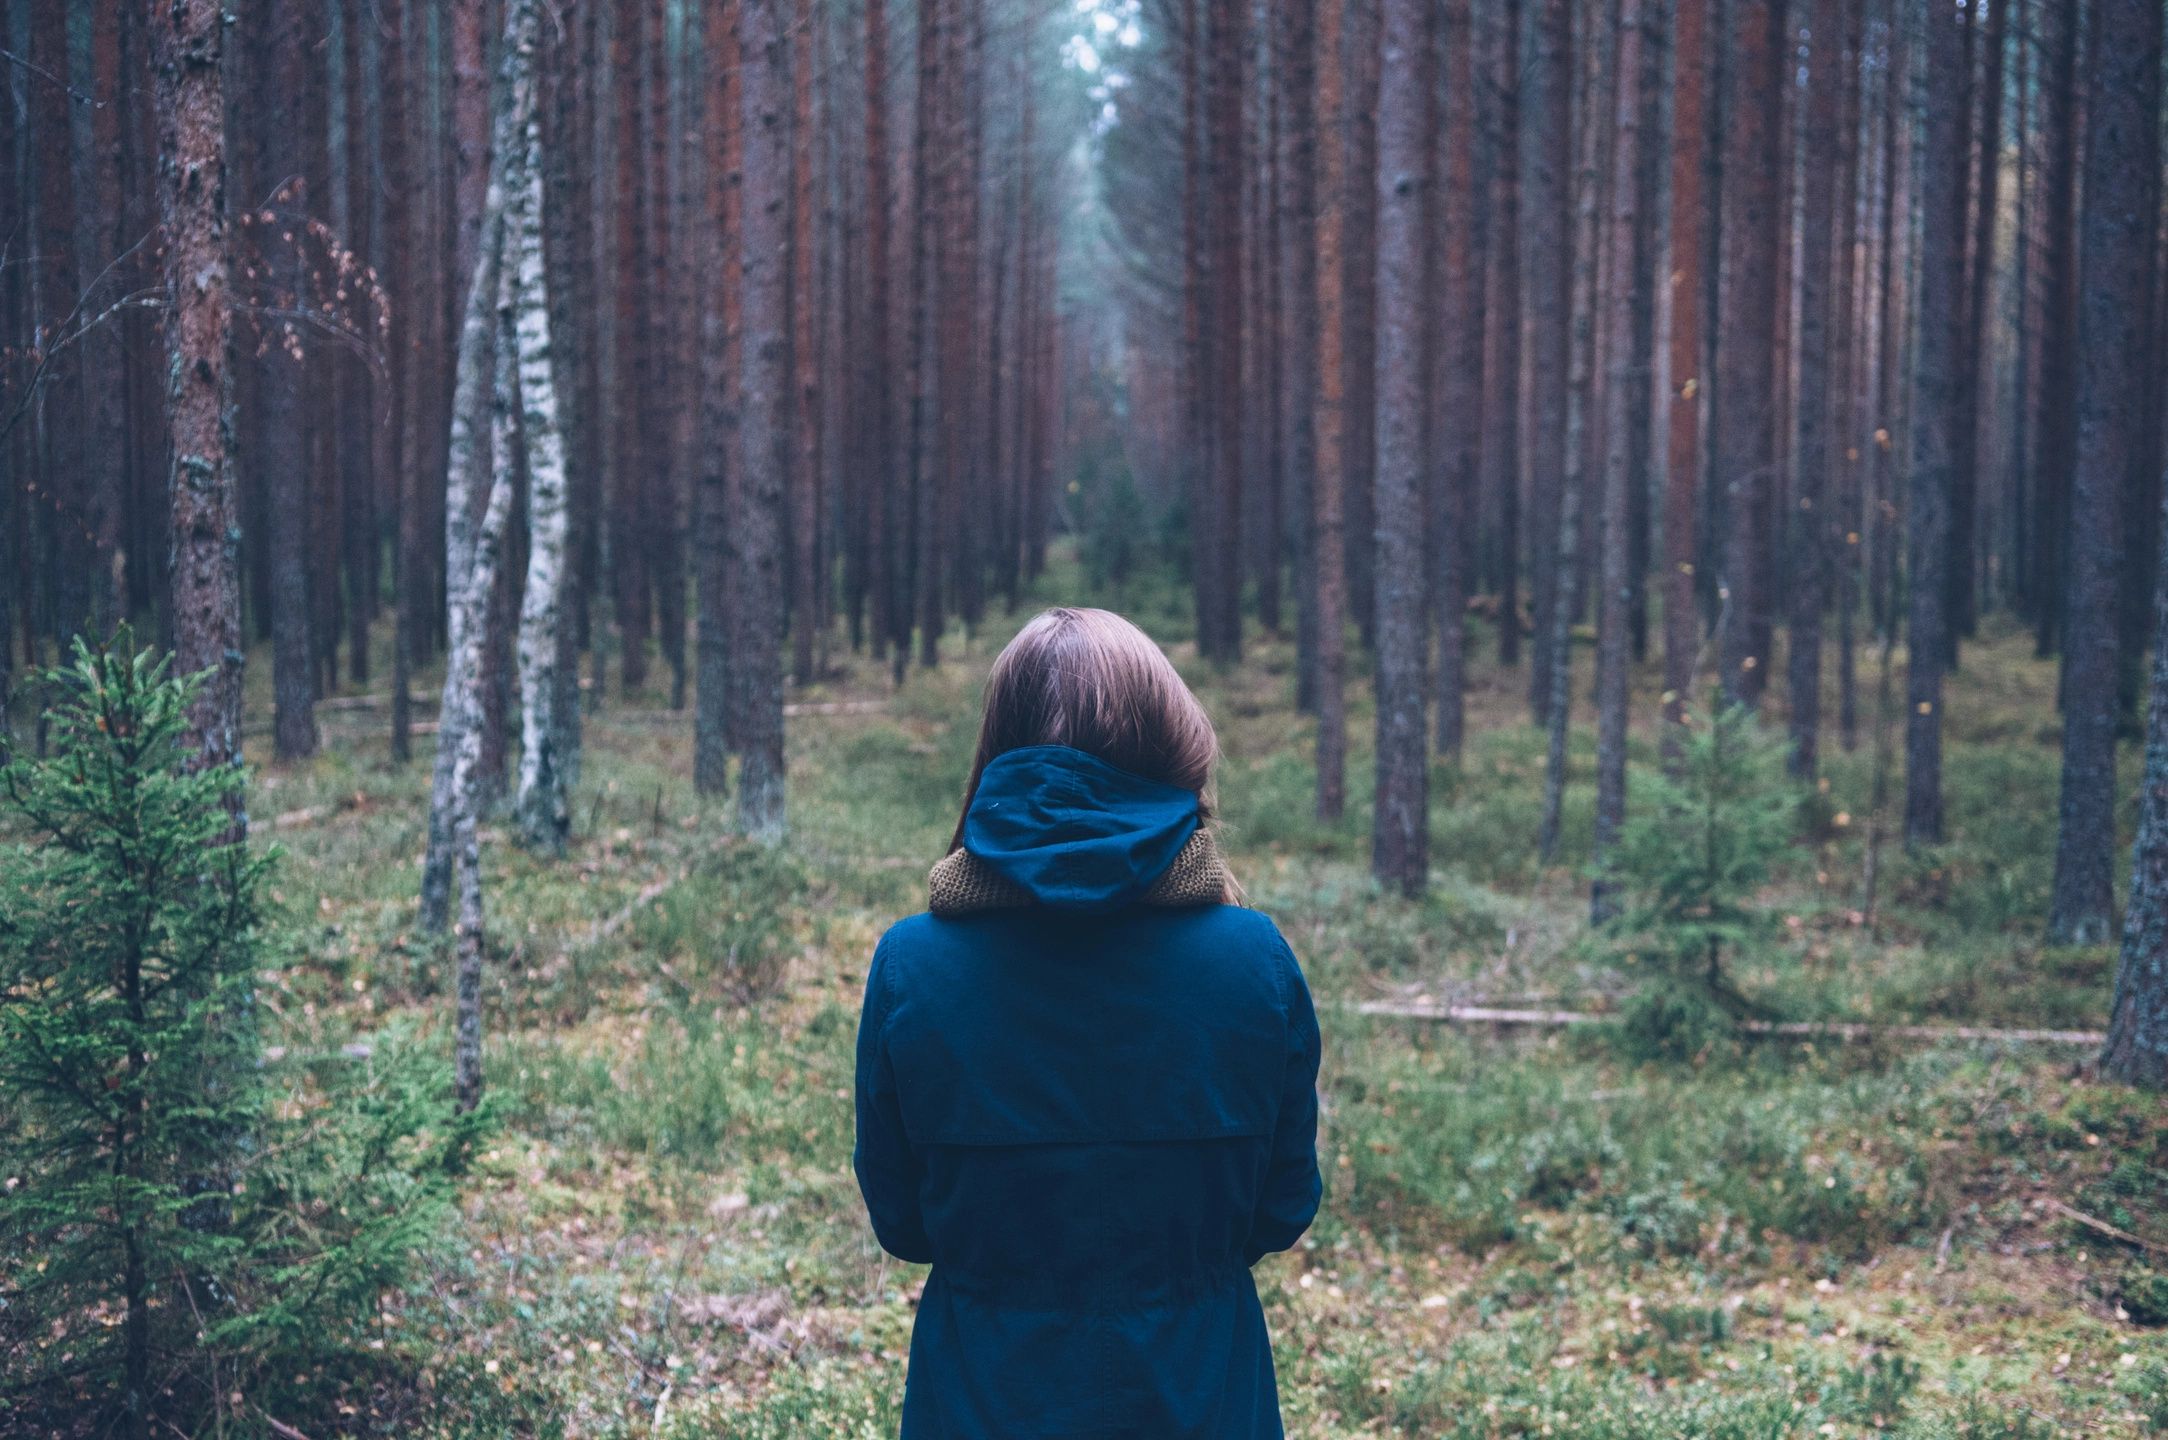 Back of Teen alone standind in the forest. Illustrates internalizing behavior like depression.